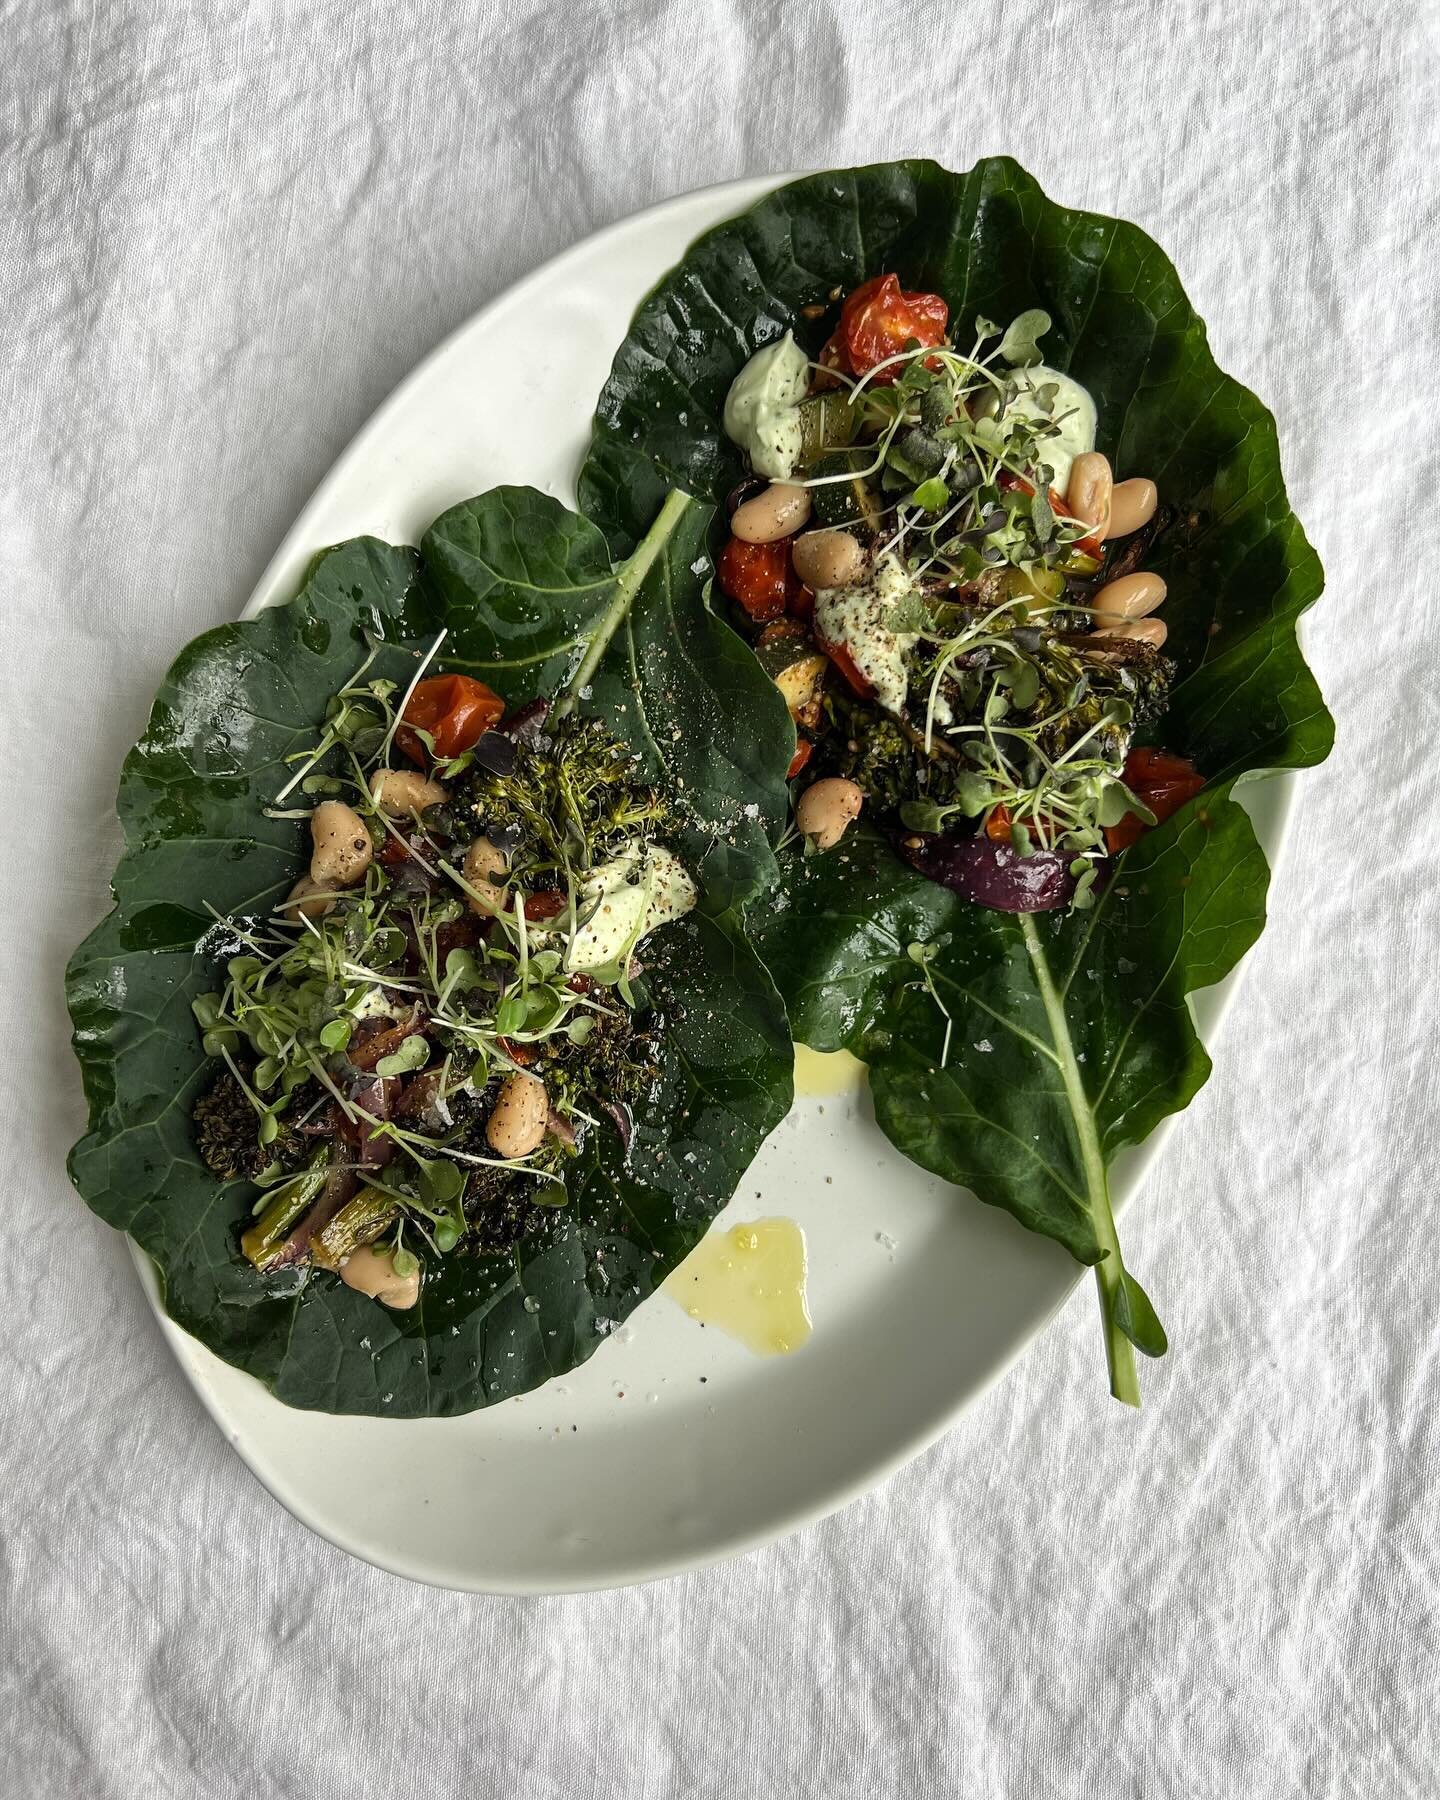 Food inspired by nature. Roasted vegetables and beans wrapped in collard greens with lemon basil yogurt and microgreens. 

I used these beautiful collard greens and broccolini from my garden to create a healthy and simple vegetable dish with bright f